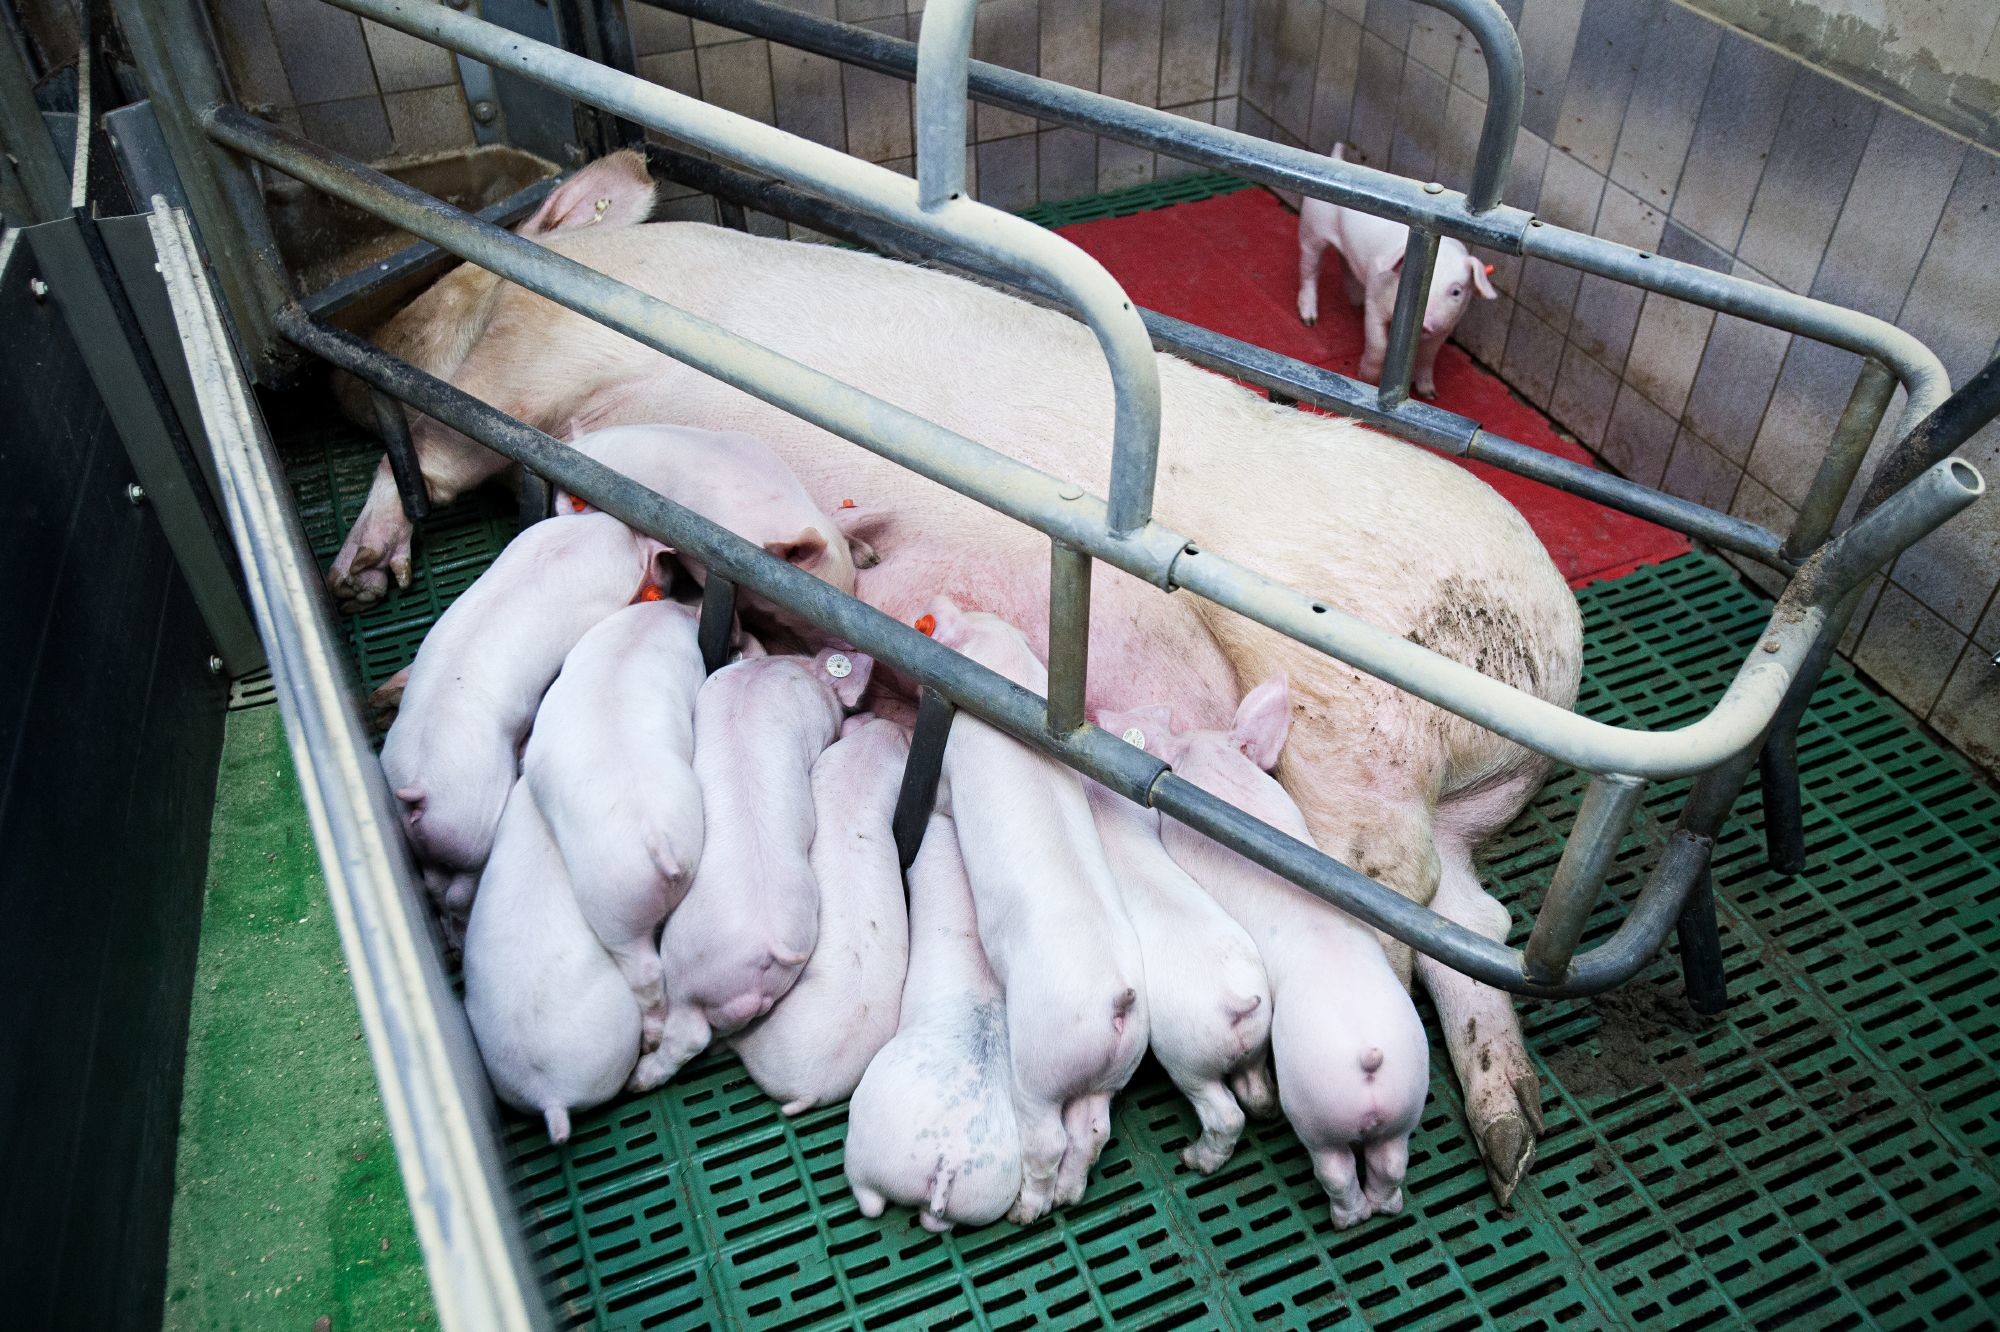 Pig and piglets in crate